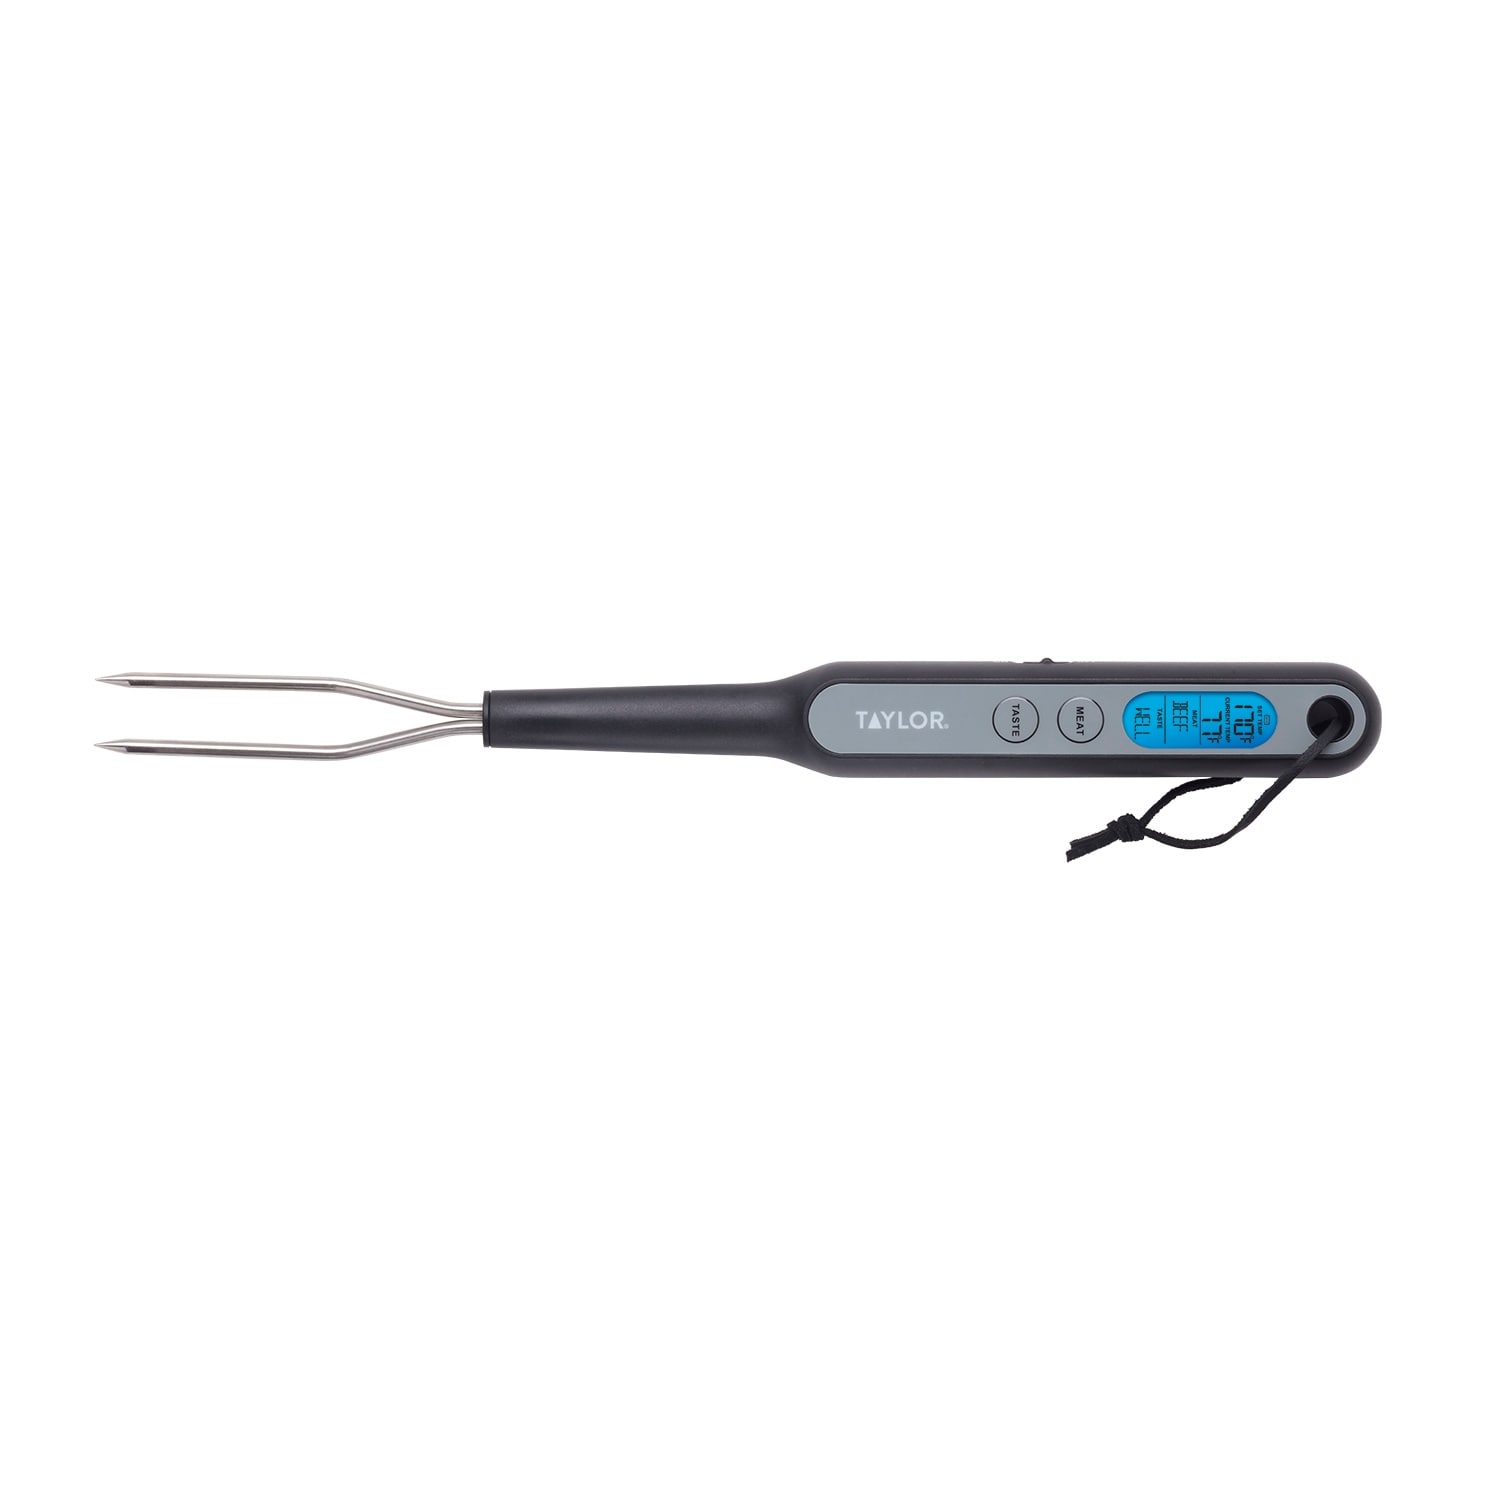 Digital Meat Thermometer/Fork